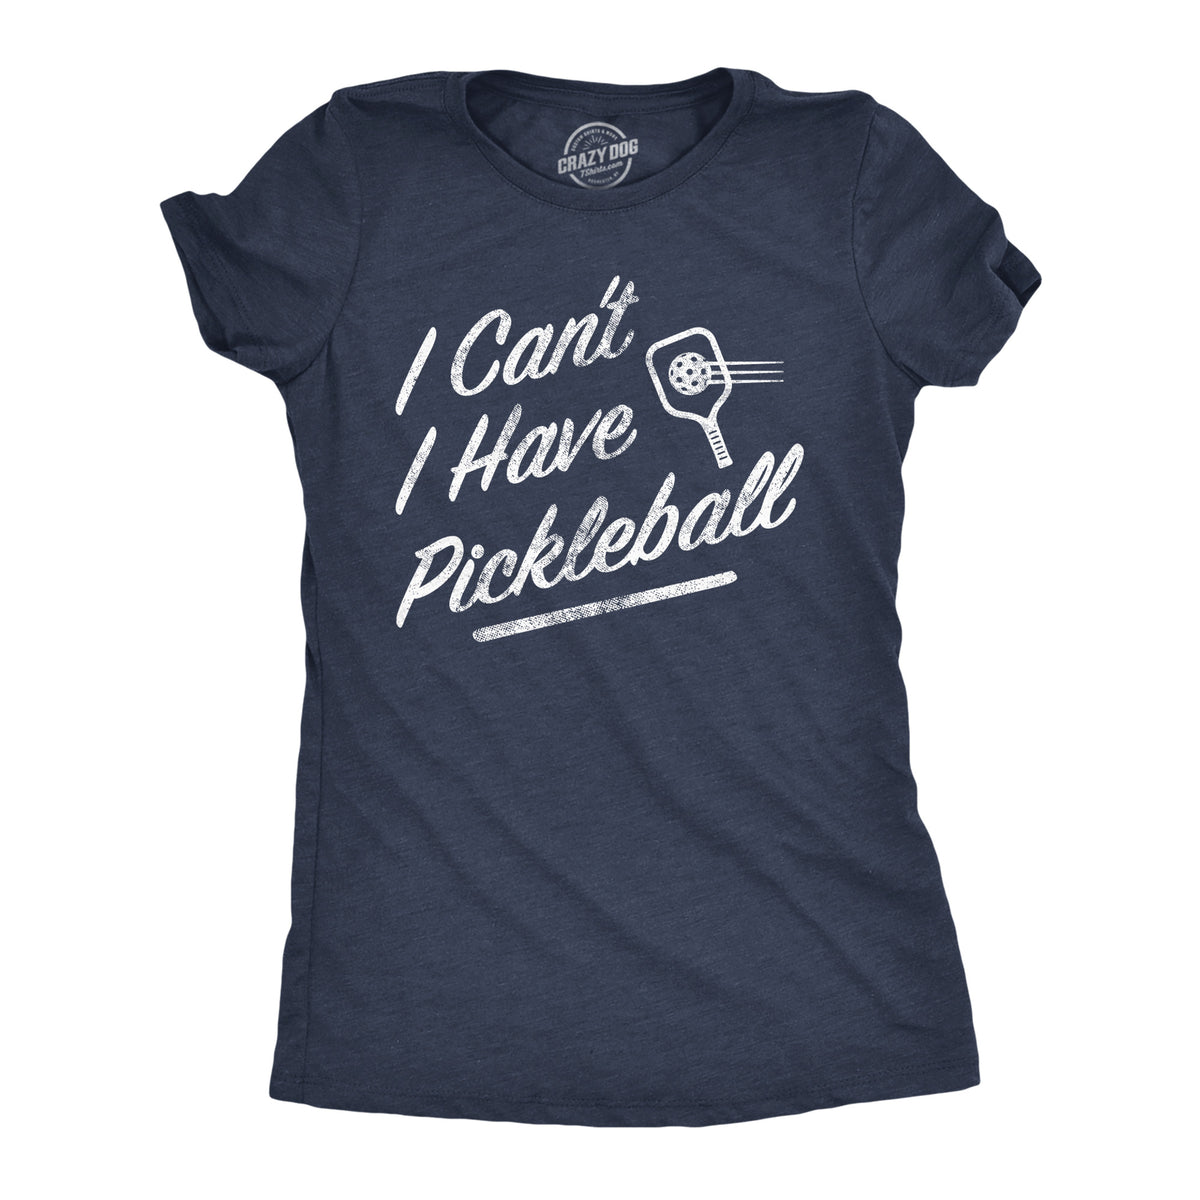 Funny Heather Navy - I Have Pickleball I Cant I Have Pickleball Womens T Shirt Nerdy Sarcastic Tee